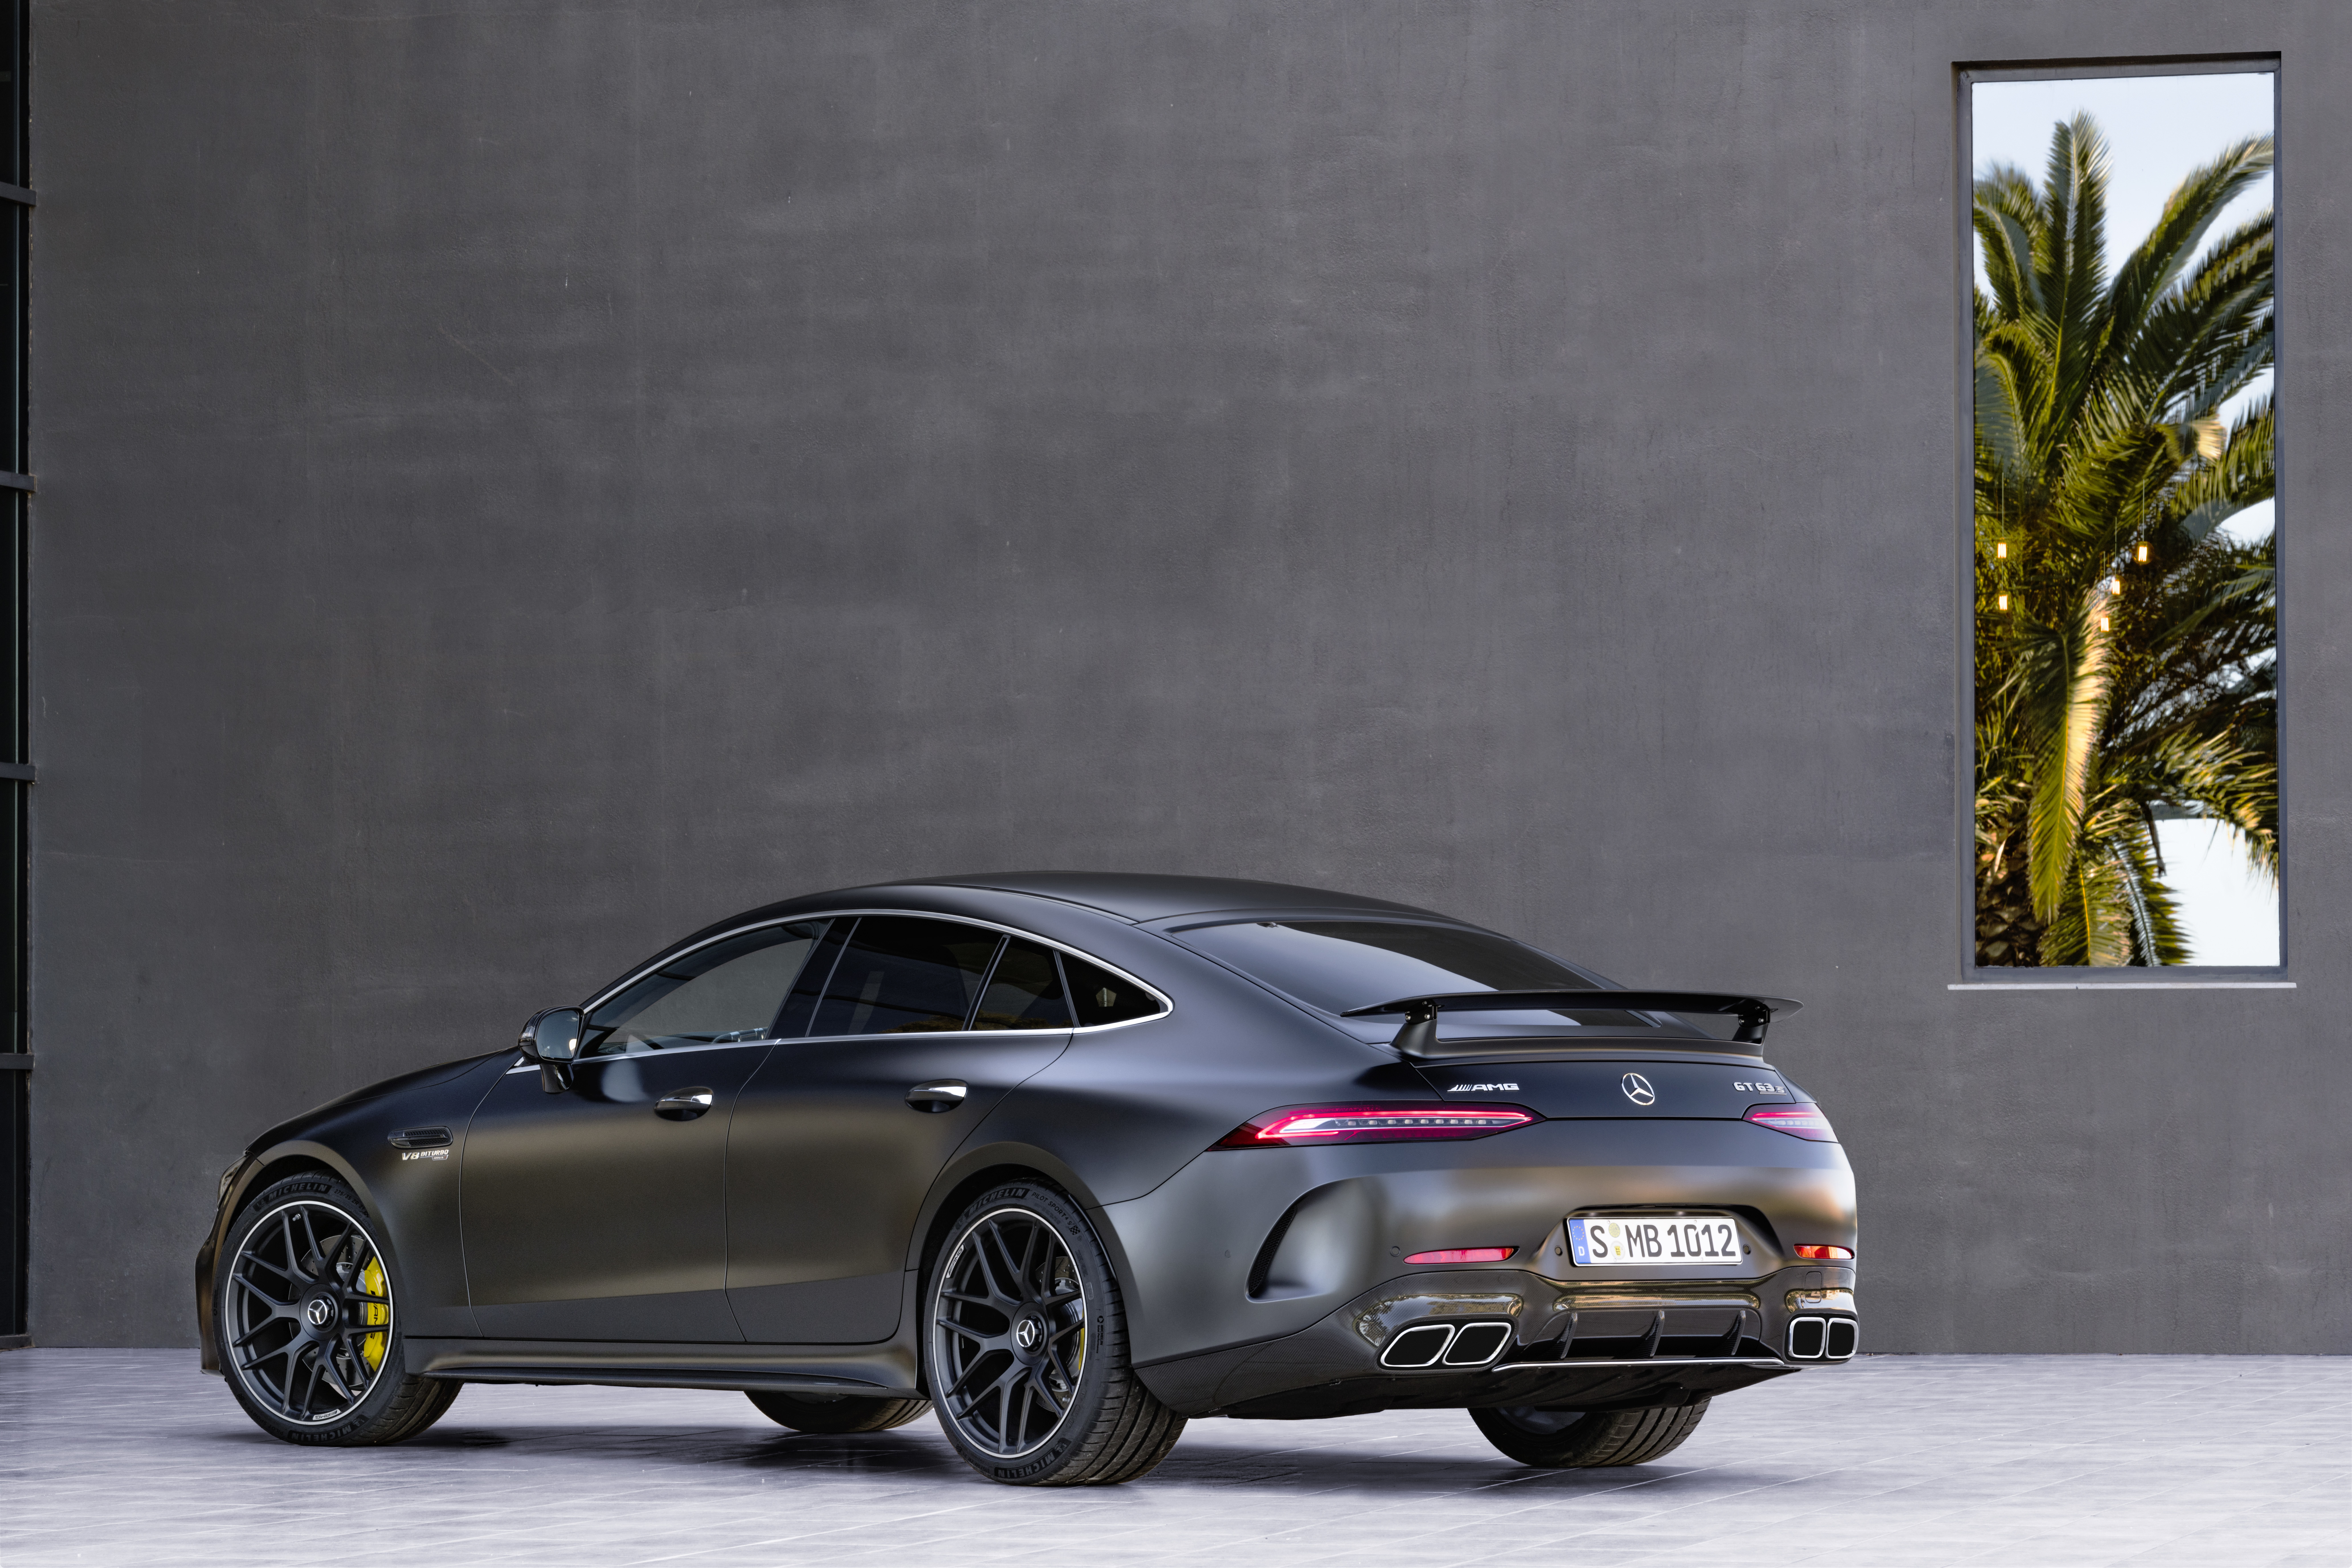 Gt 63. Mercedes AMG gt 63 s 4matic+. Мерседес gt 63s. Мерседес AMG gt 63s. Mercedes AMG gt 63s Coupe.